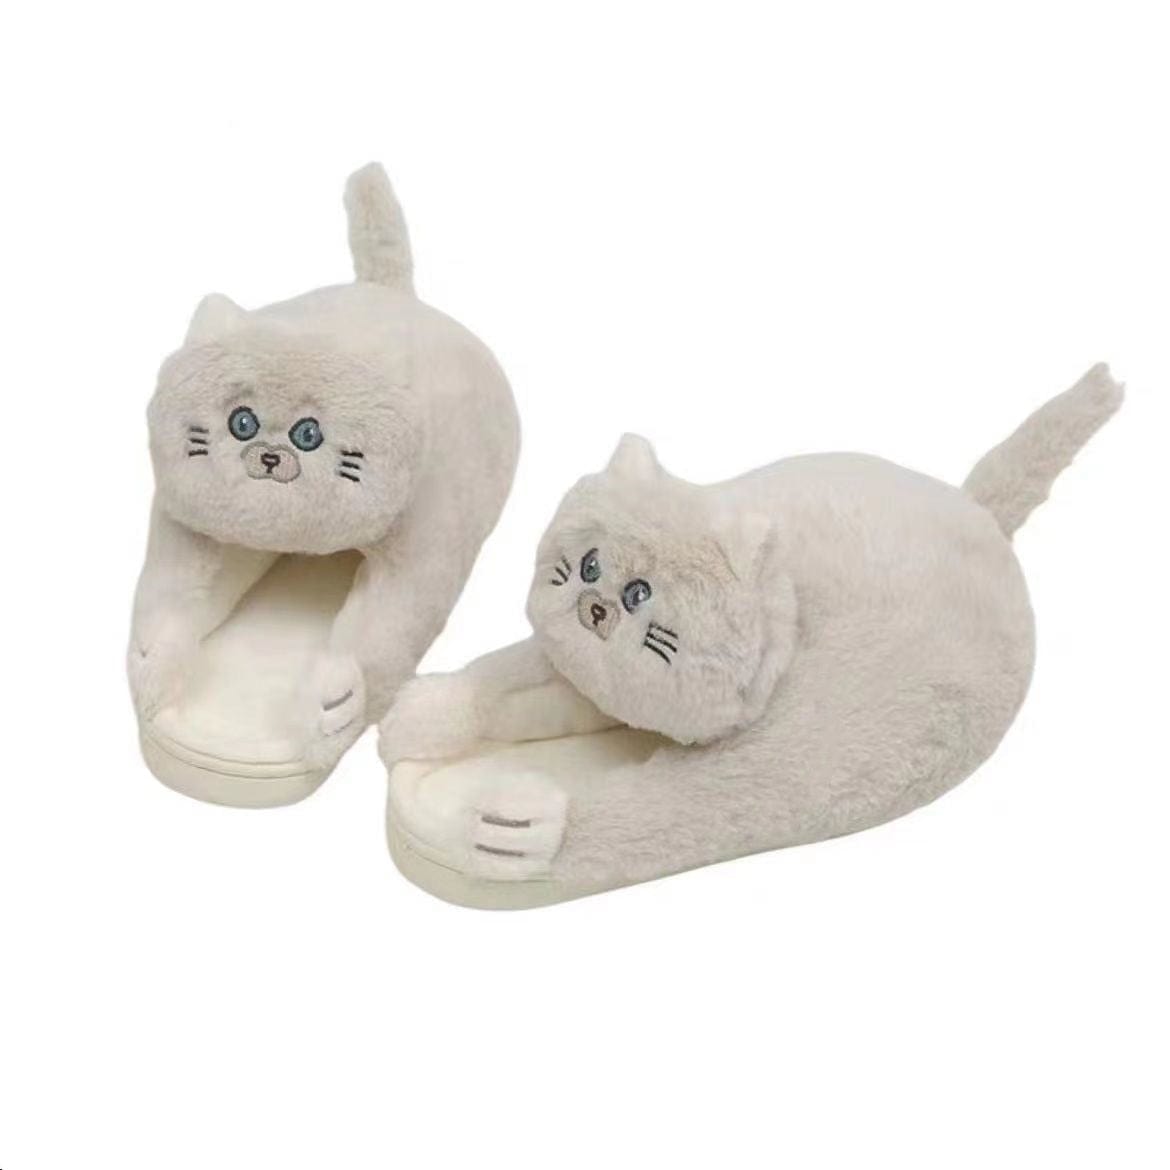 Buy Cat Slippers Online - Cuddly and Comfy!